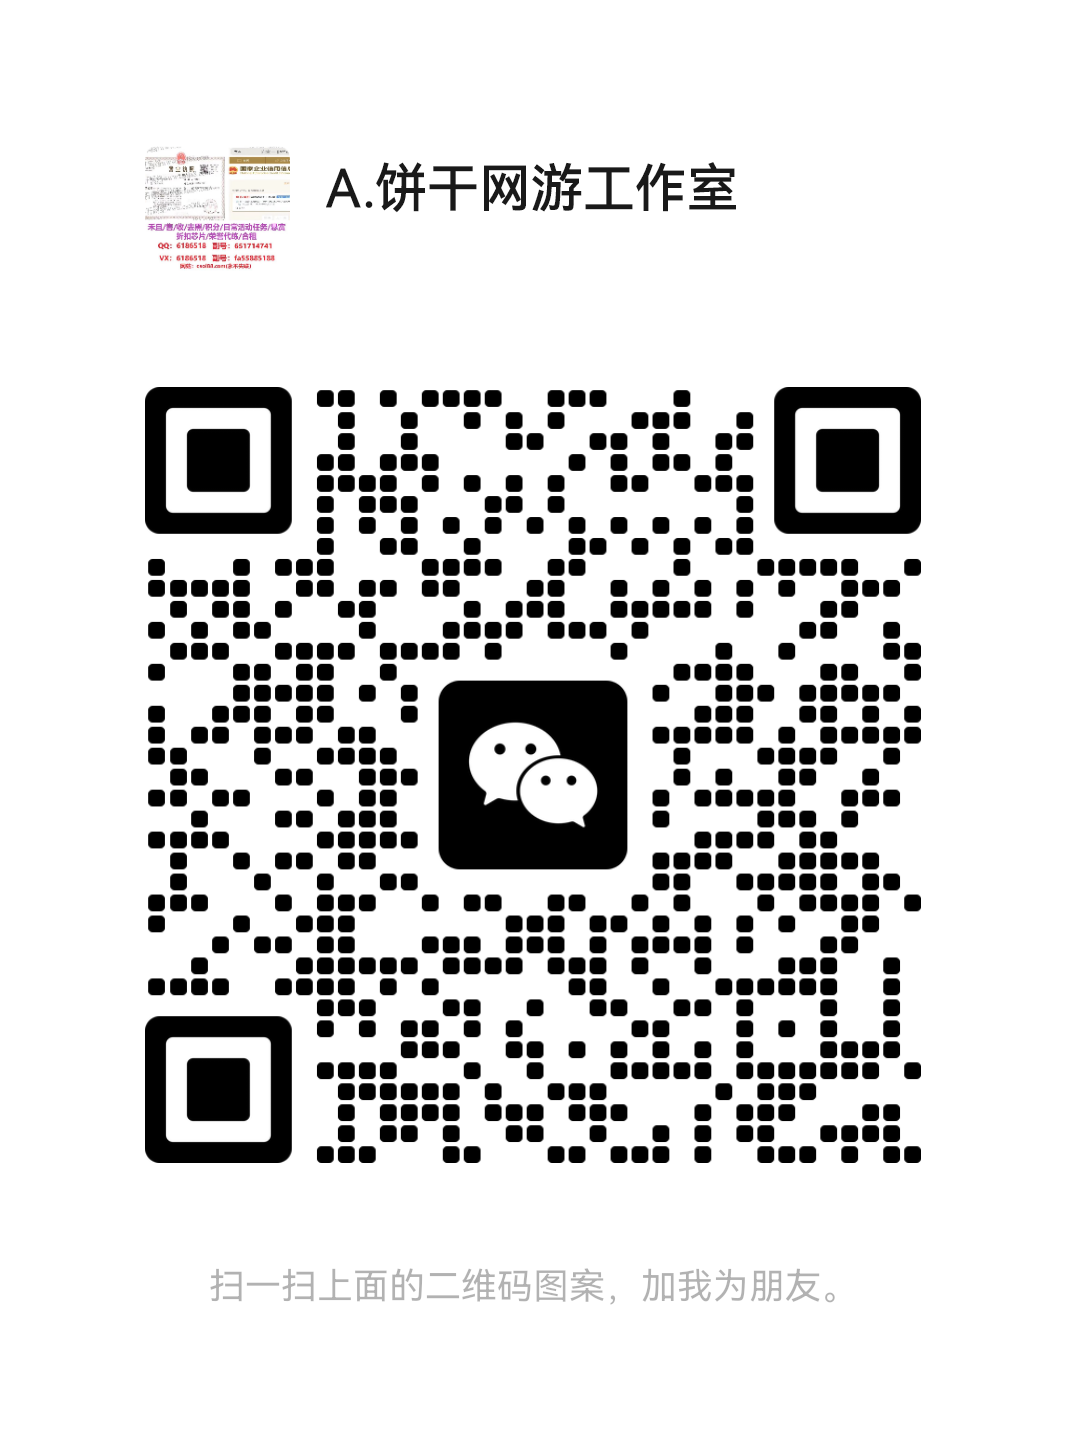 mmqrcode1668688806347.png